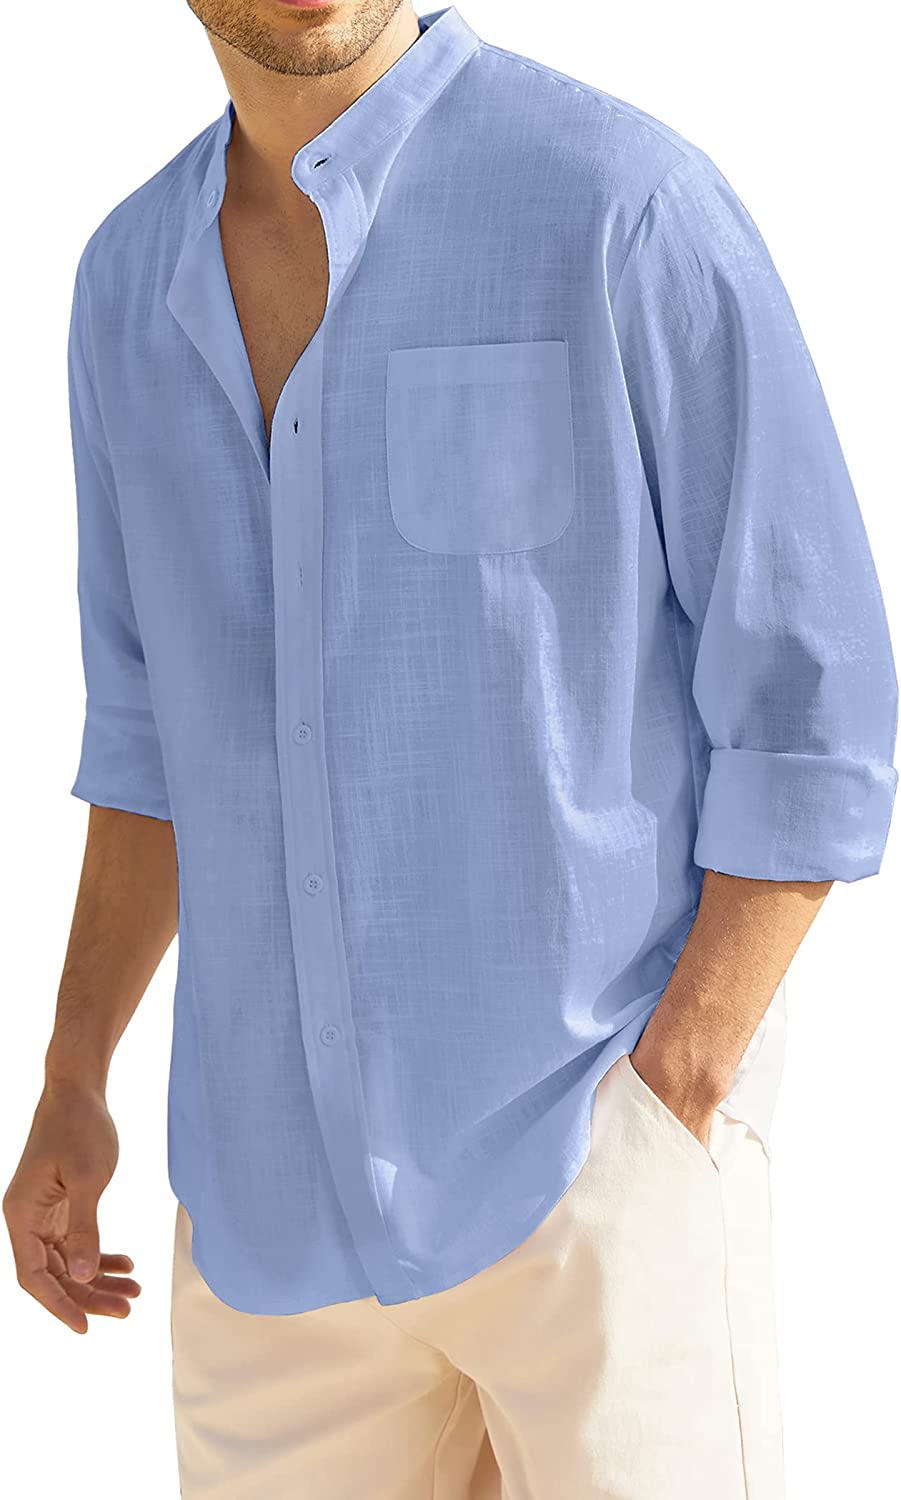  Men's Casual Summer Button Down Linen Shirts Short Sleeve  Cotton Beach Tops with Pocket Beige Medium : Clothing, Shoes & Jewelry